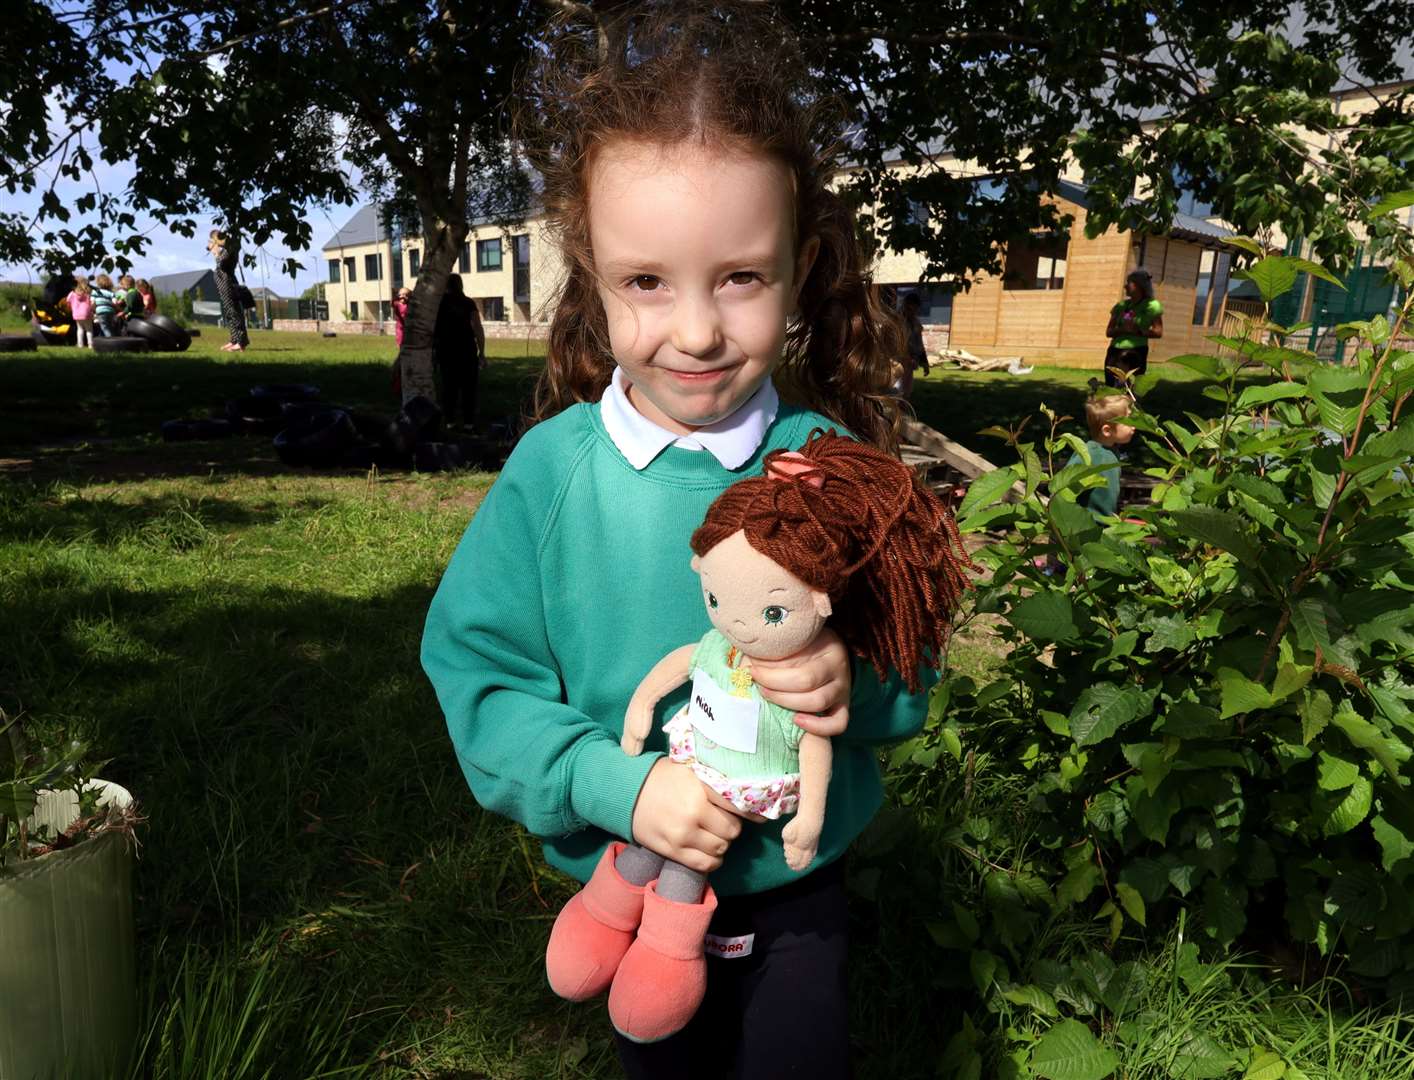 Niah Faukes found the doll with her name on it. Picture: James Mackenzie.